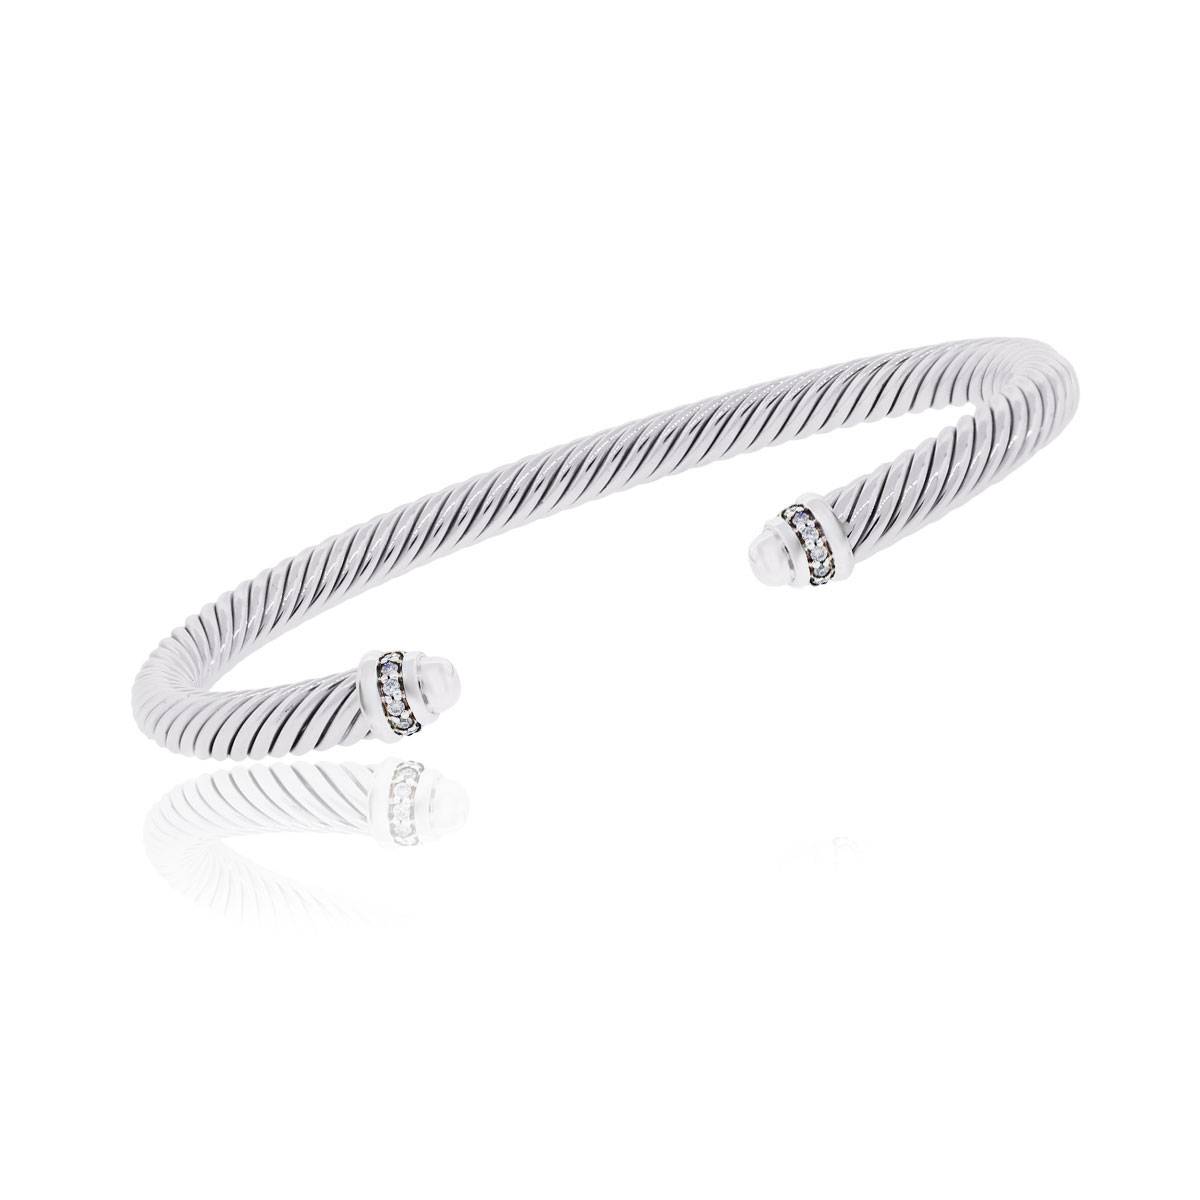 David Yurman pearl and silver cable bracelet